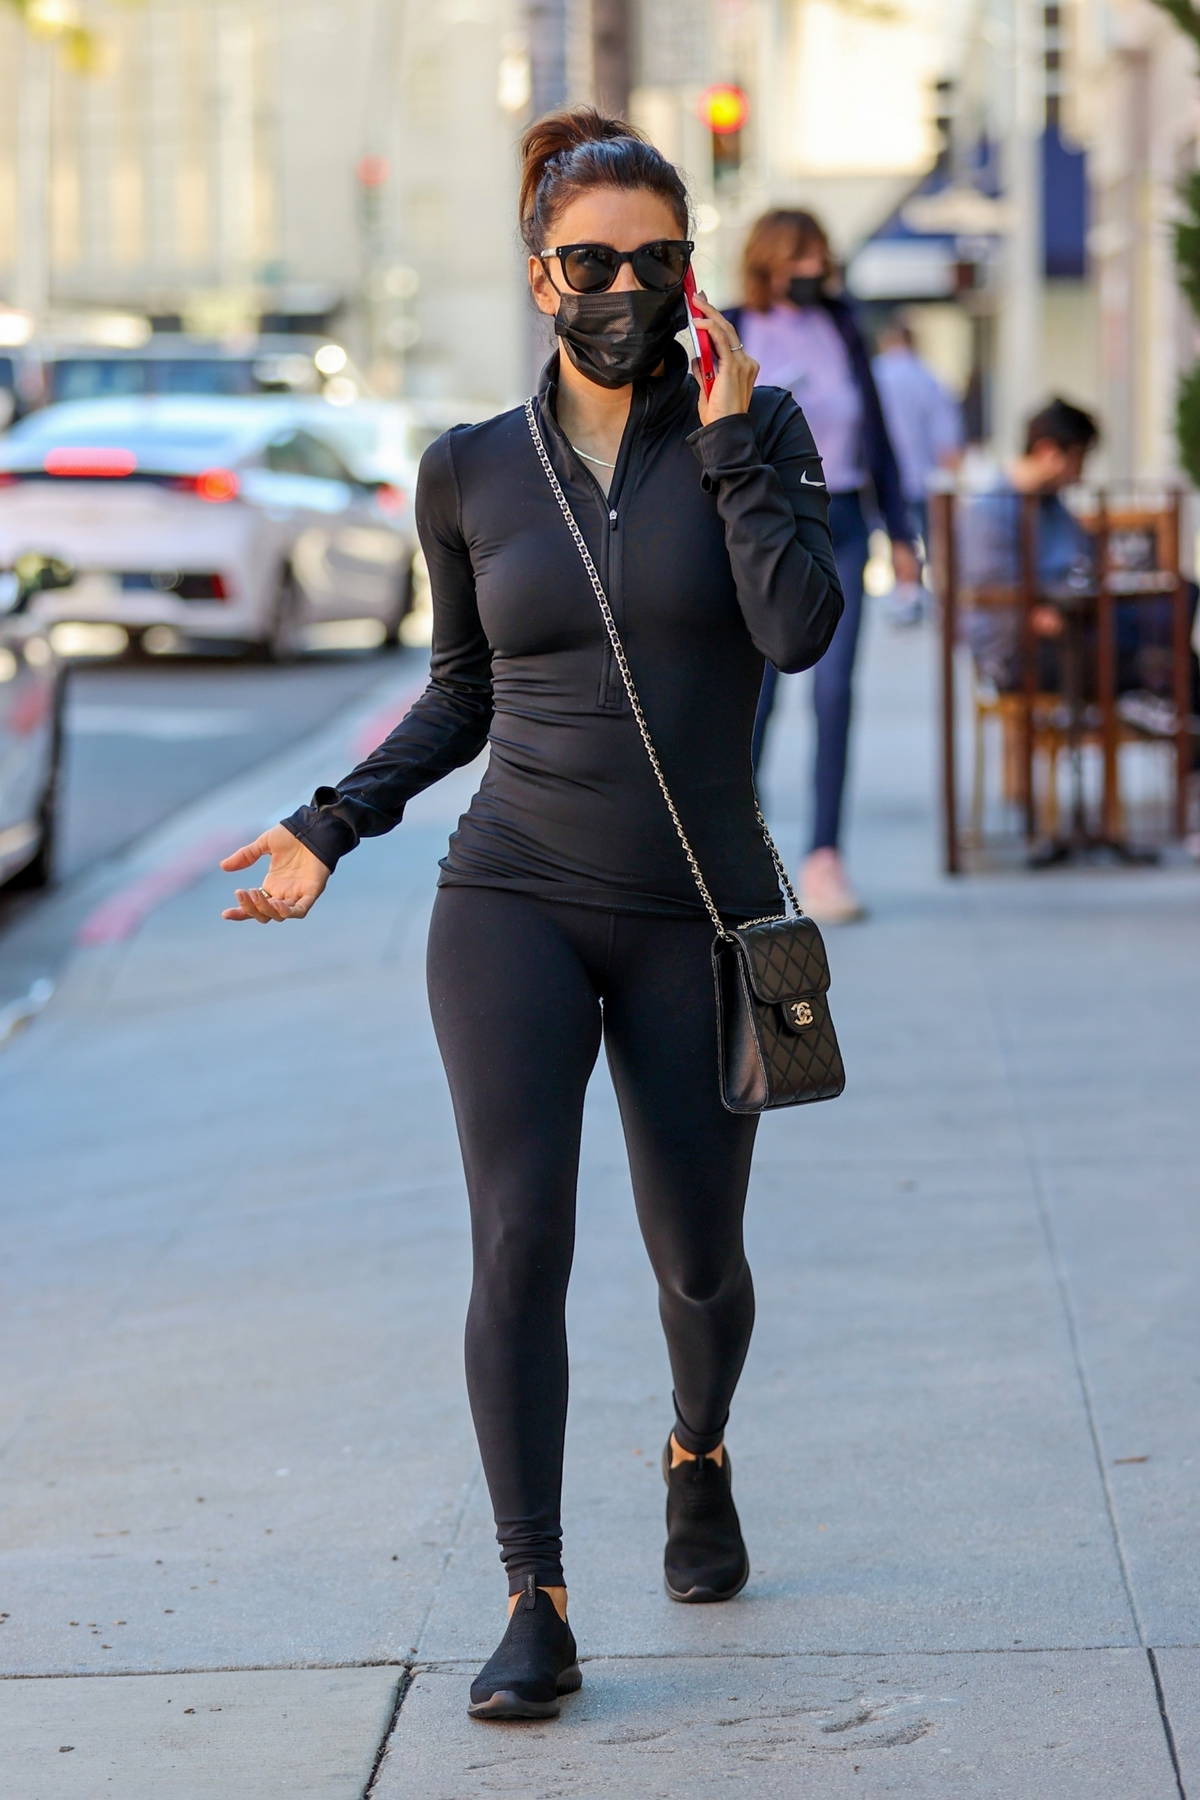 Eva Longoria sports a form-fitting black top with leggings while out  running errands in Beverly